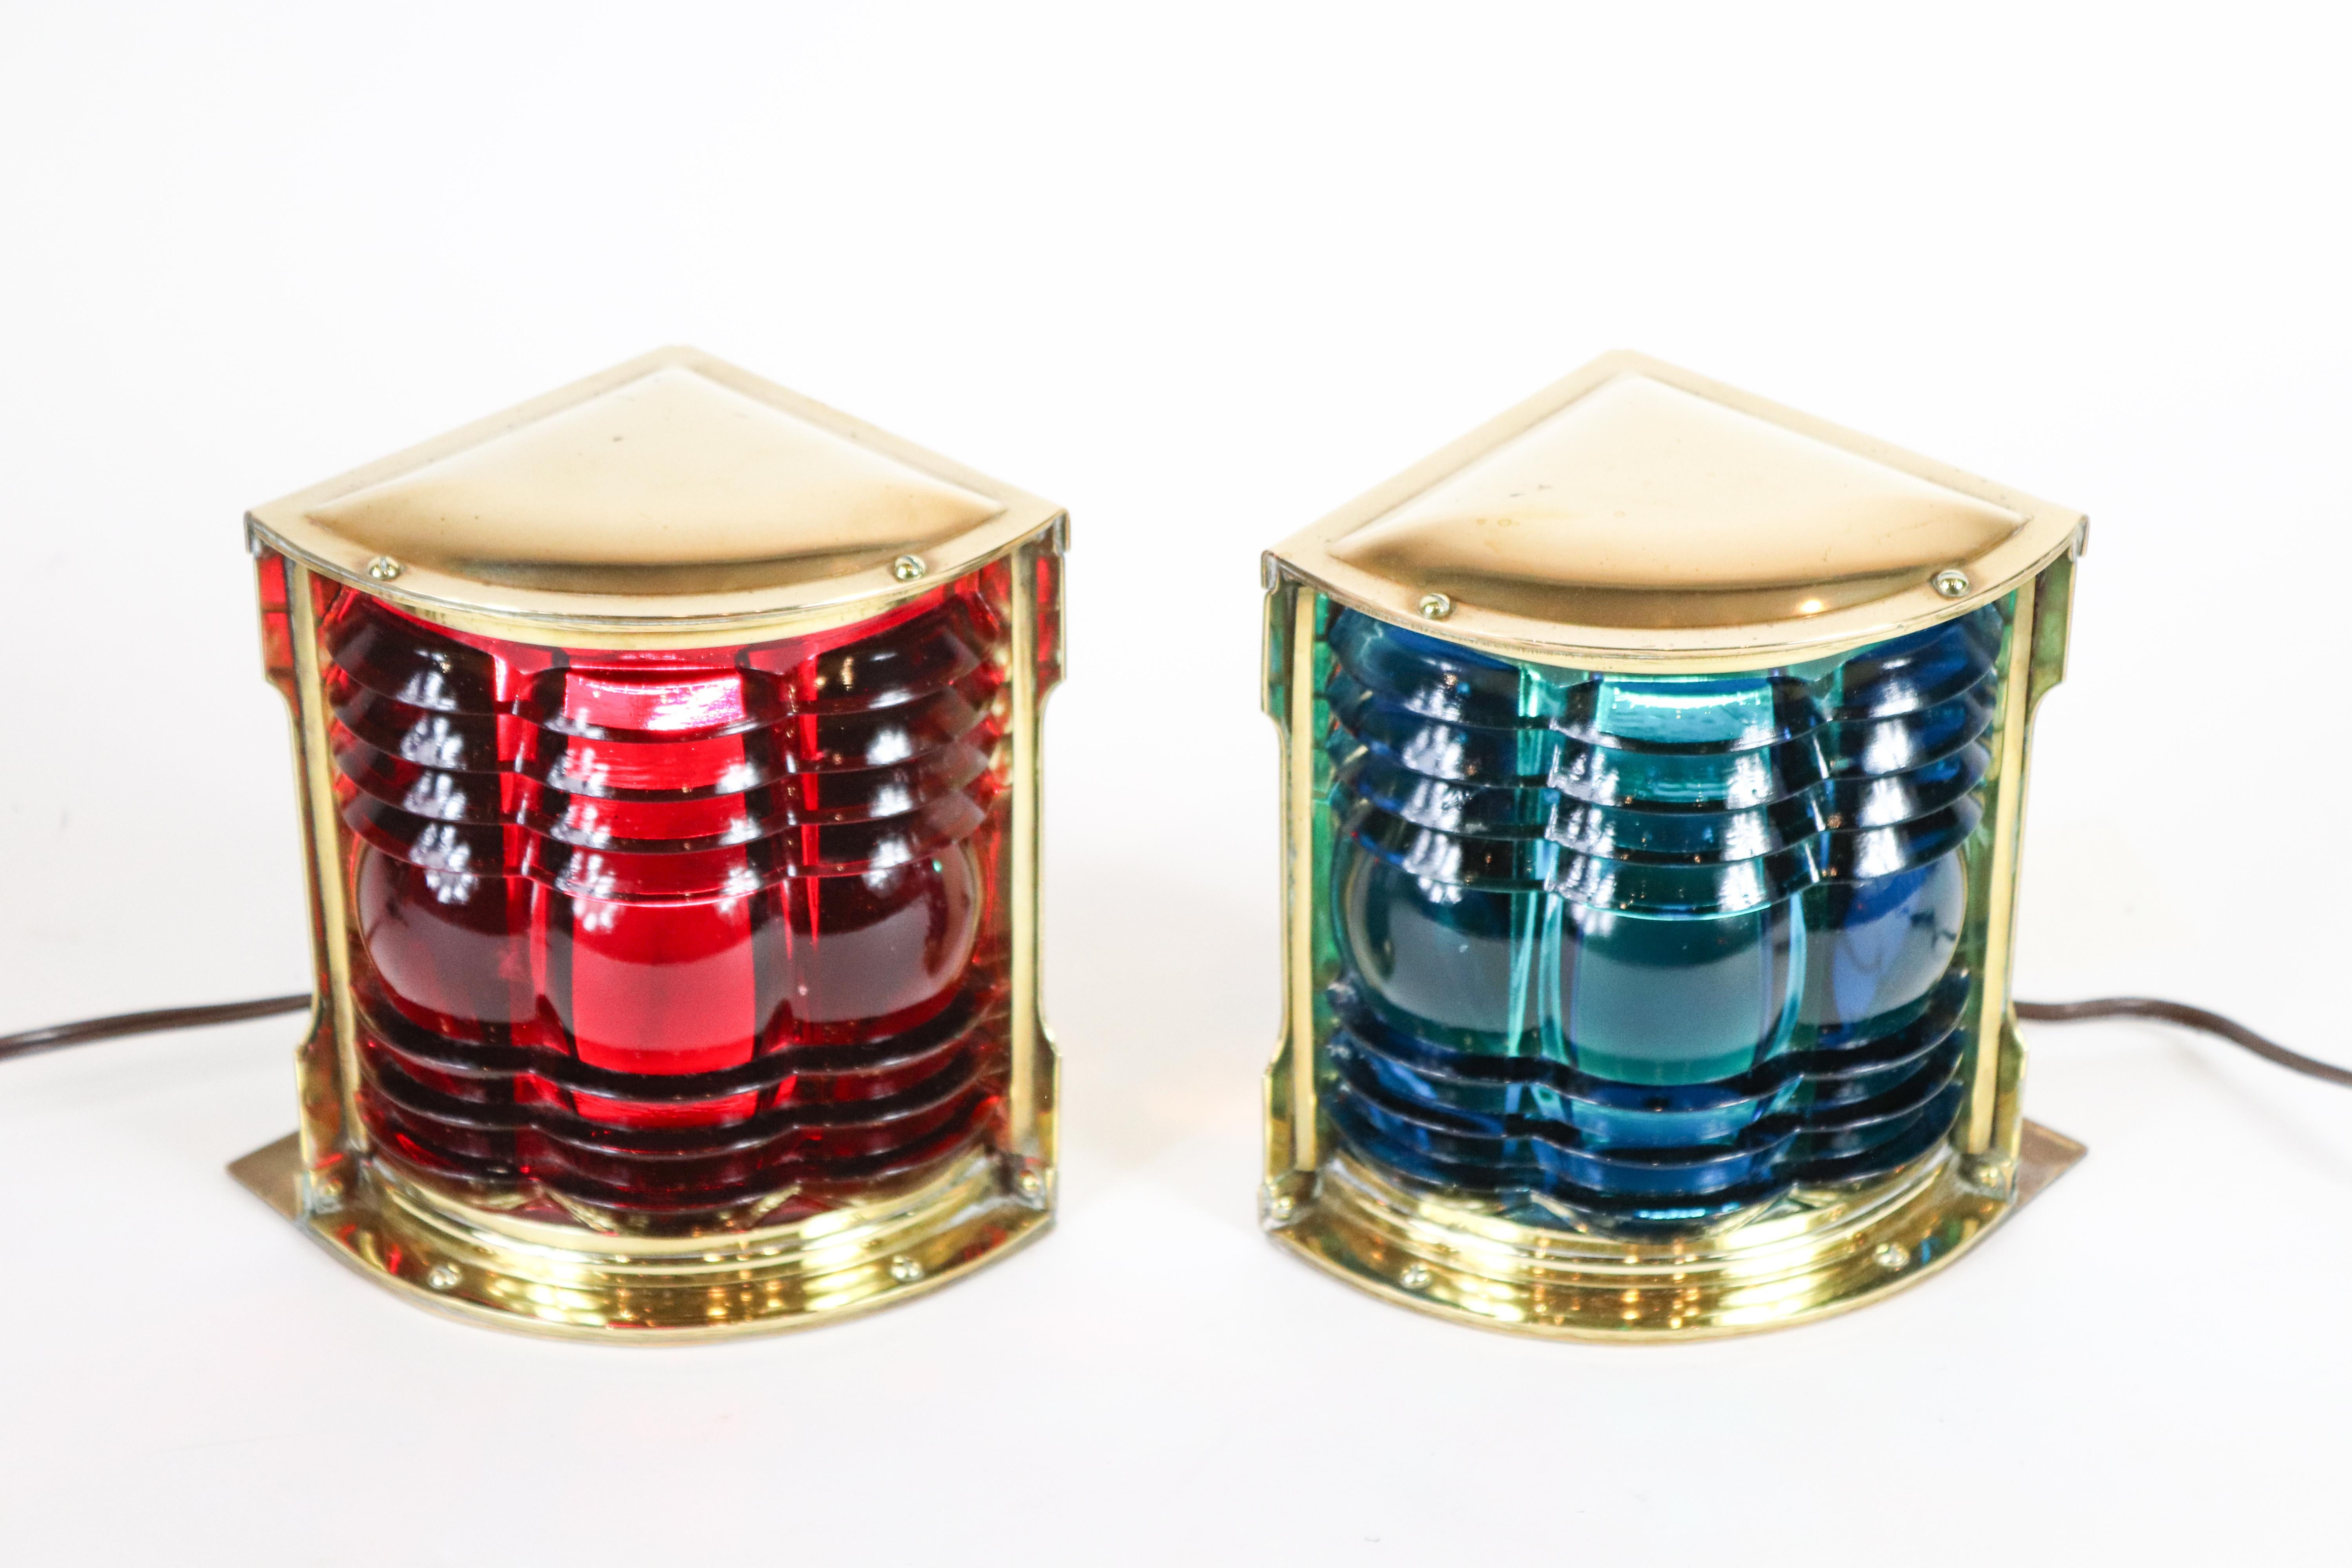 Rare port and starboard lanterns with Fresnel red and blue/green lenses. Brass cases. Electrified. 6.5 x 6 x 5.5.